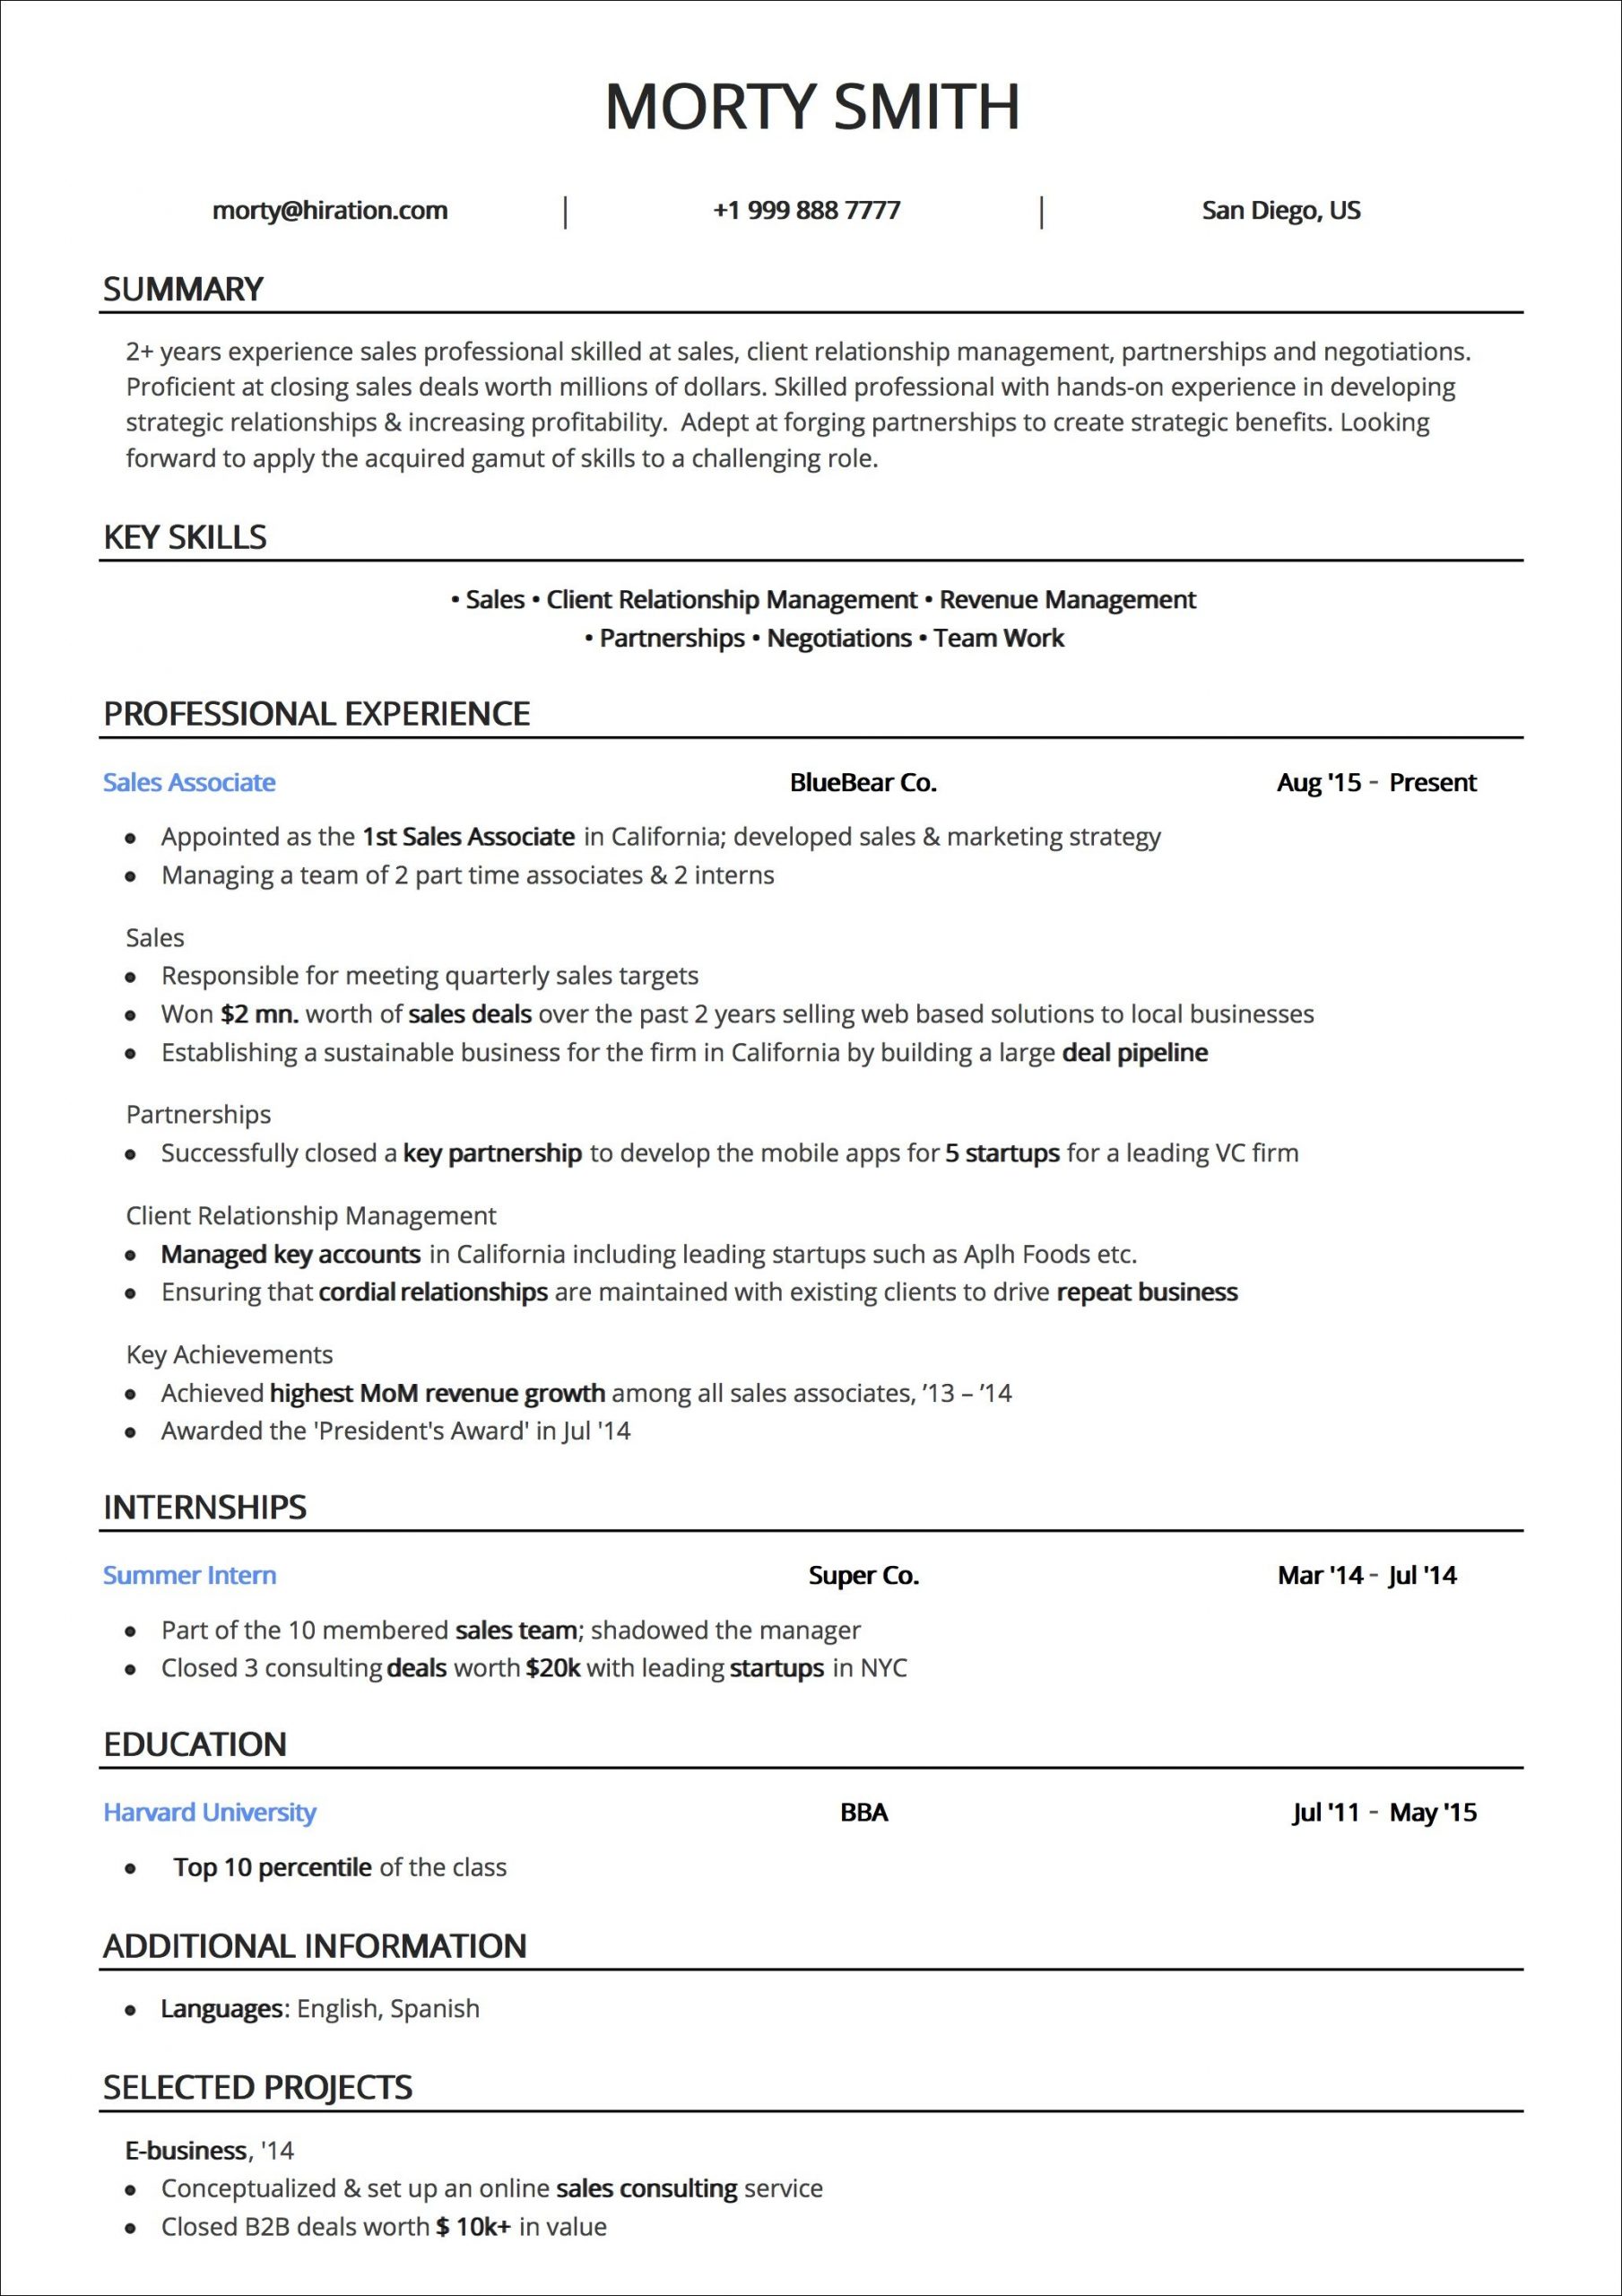 Resume Templates The 2020 Guide To Choosing The Best inside size 2067 X 2925